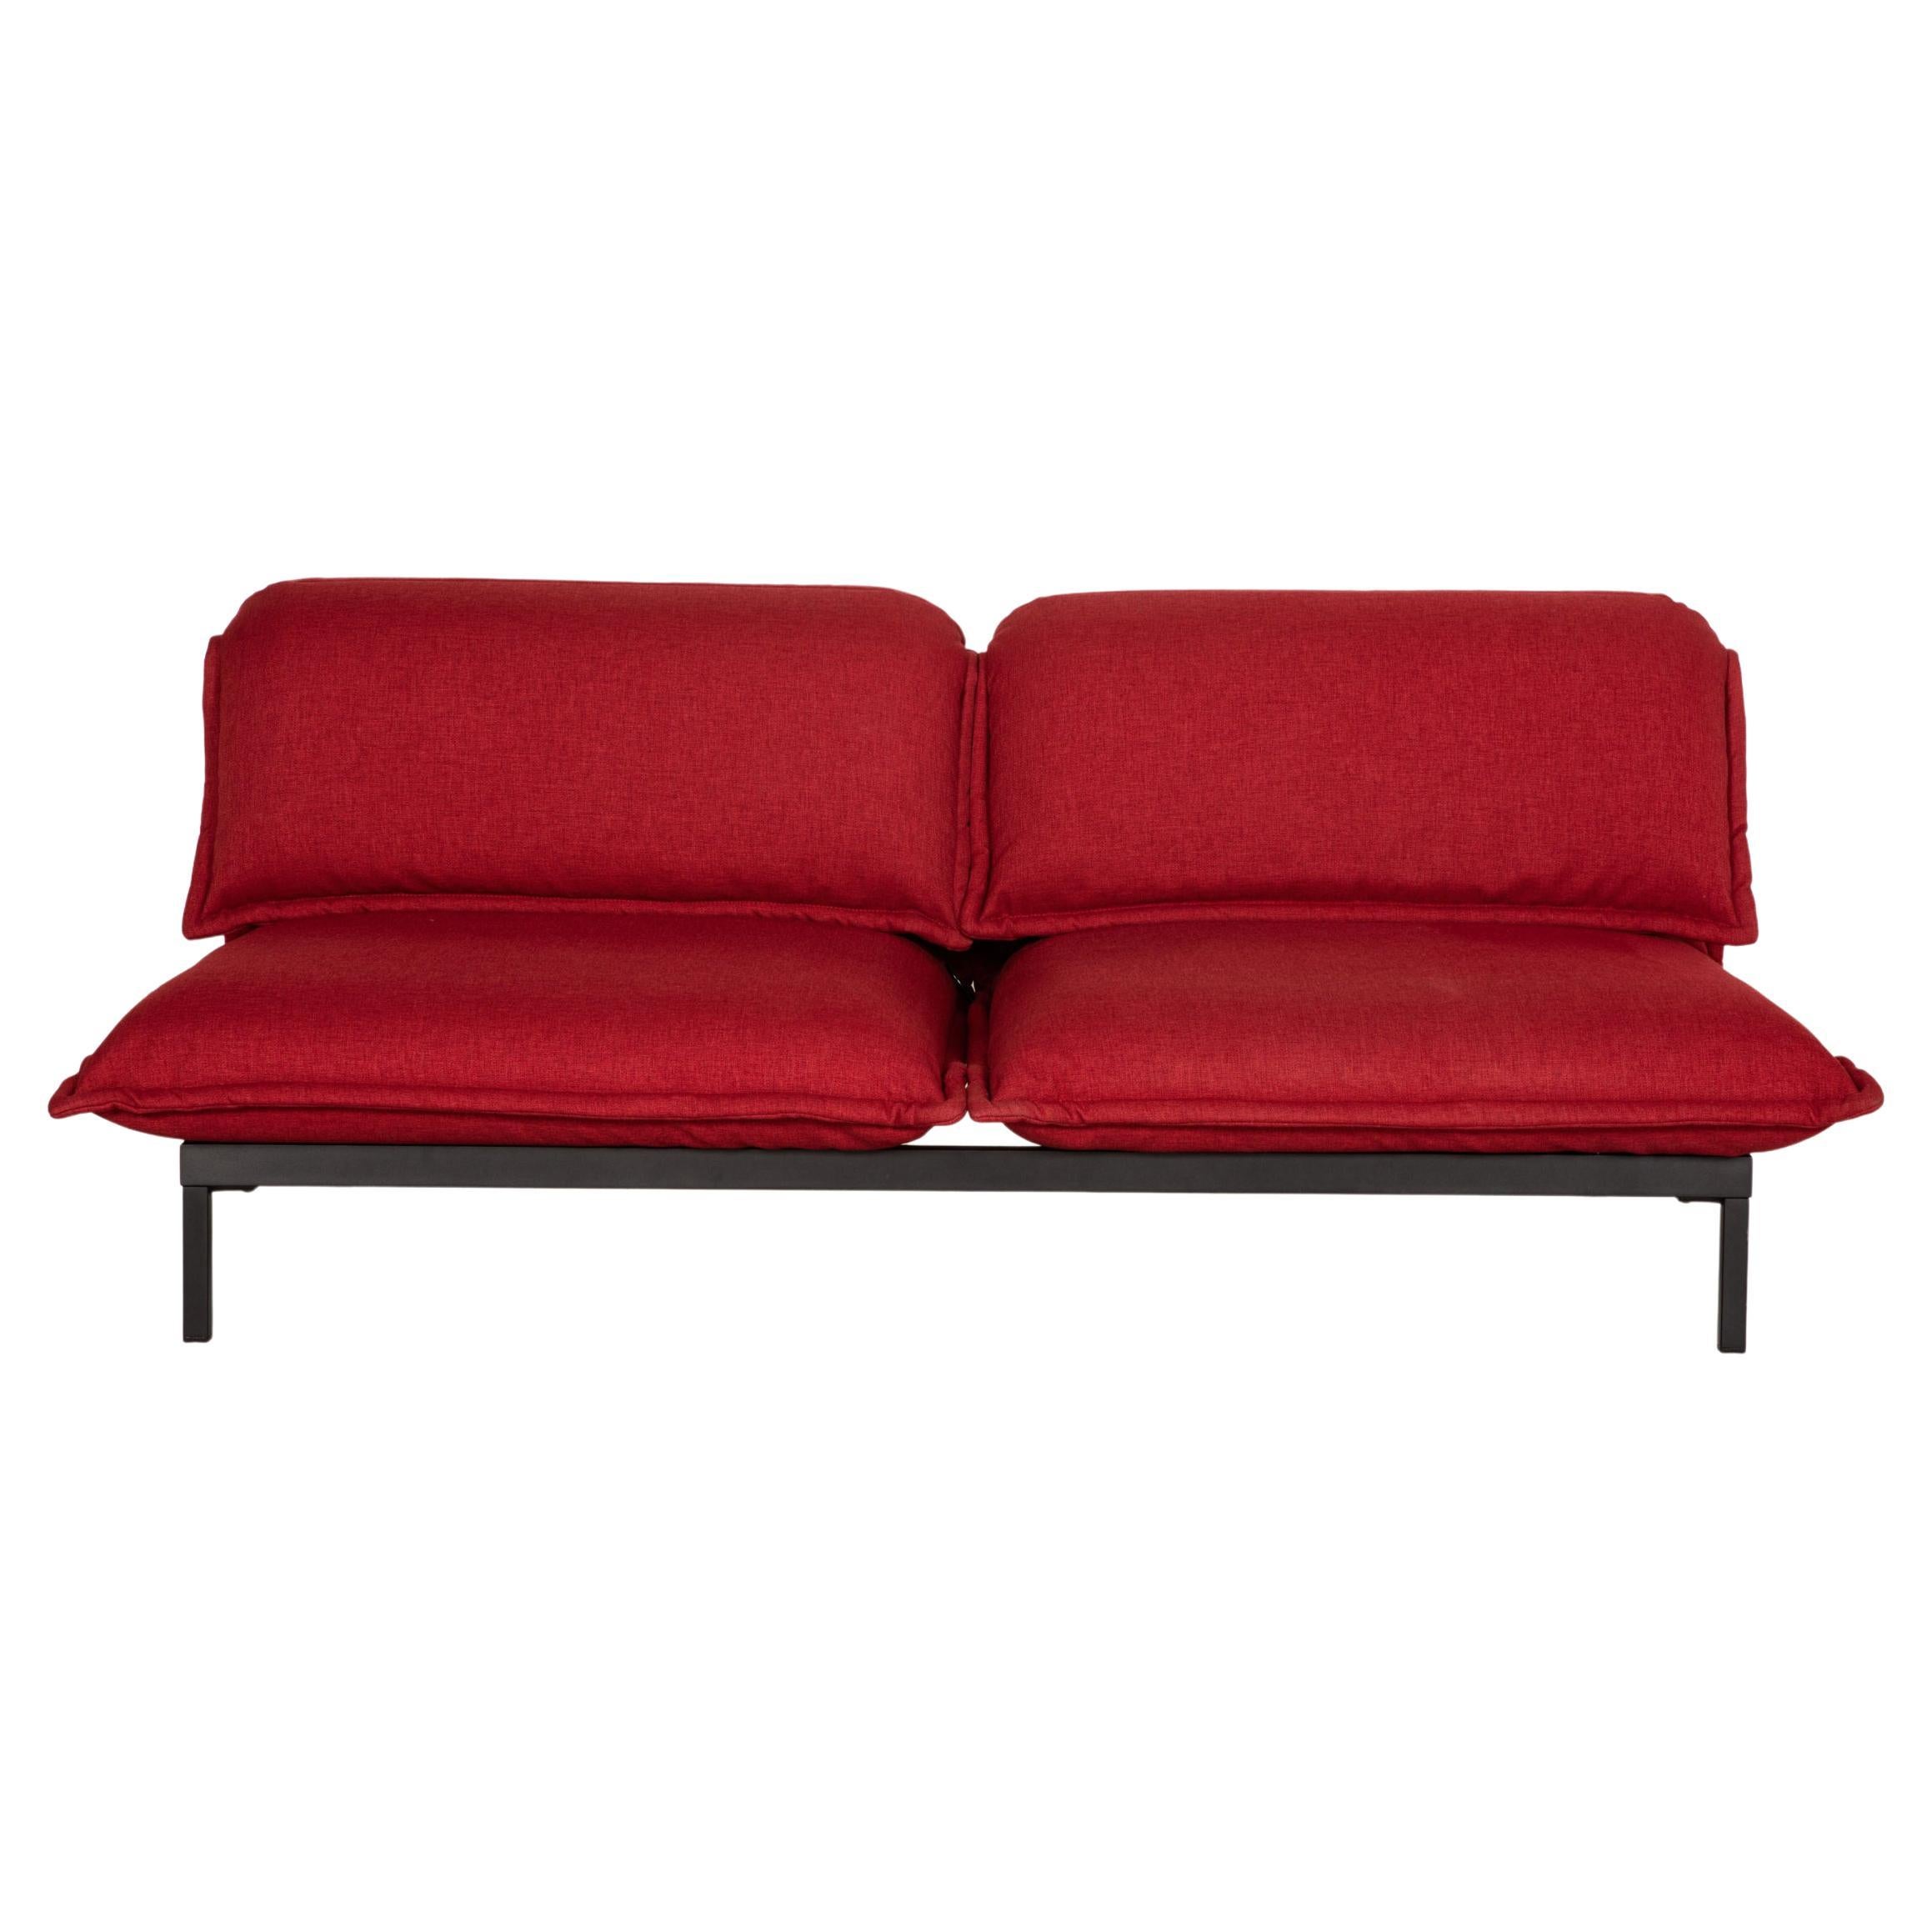 Rolf Benz Nova Fabric Sofa Red Two-Seater Function Relax Function For Sale